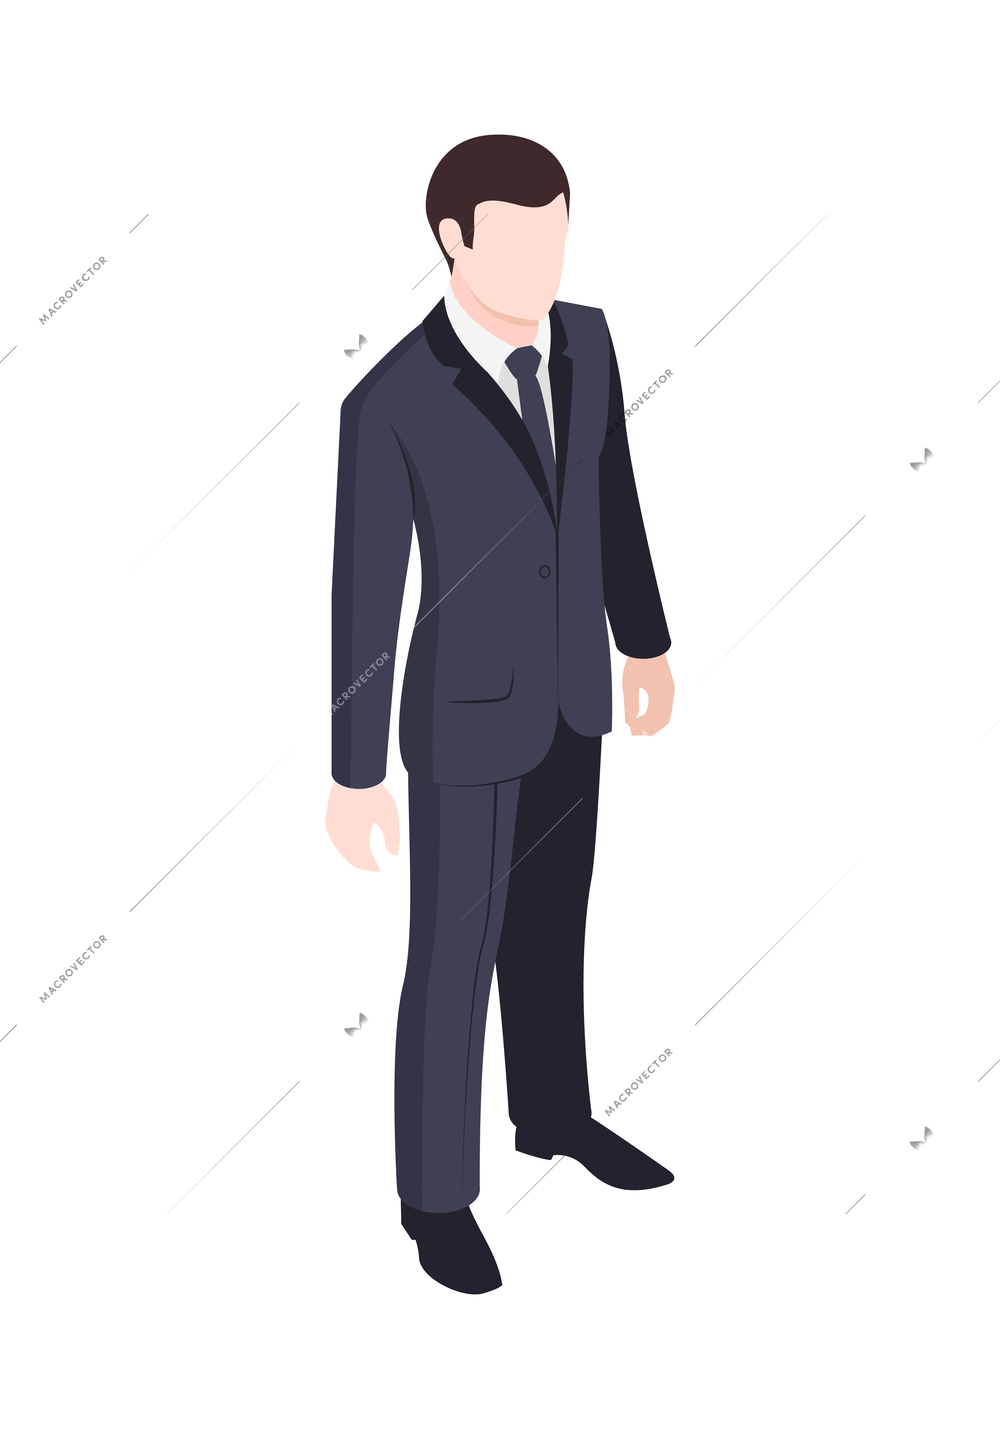 Business people isometric icon with male character in office wear vector illustration